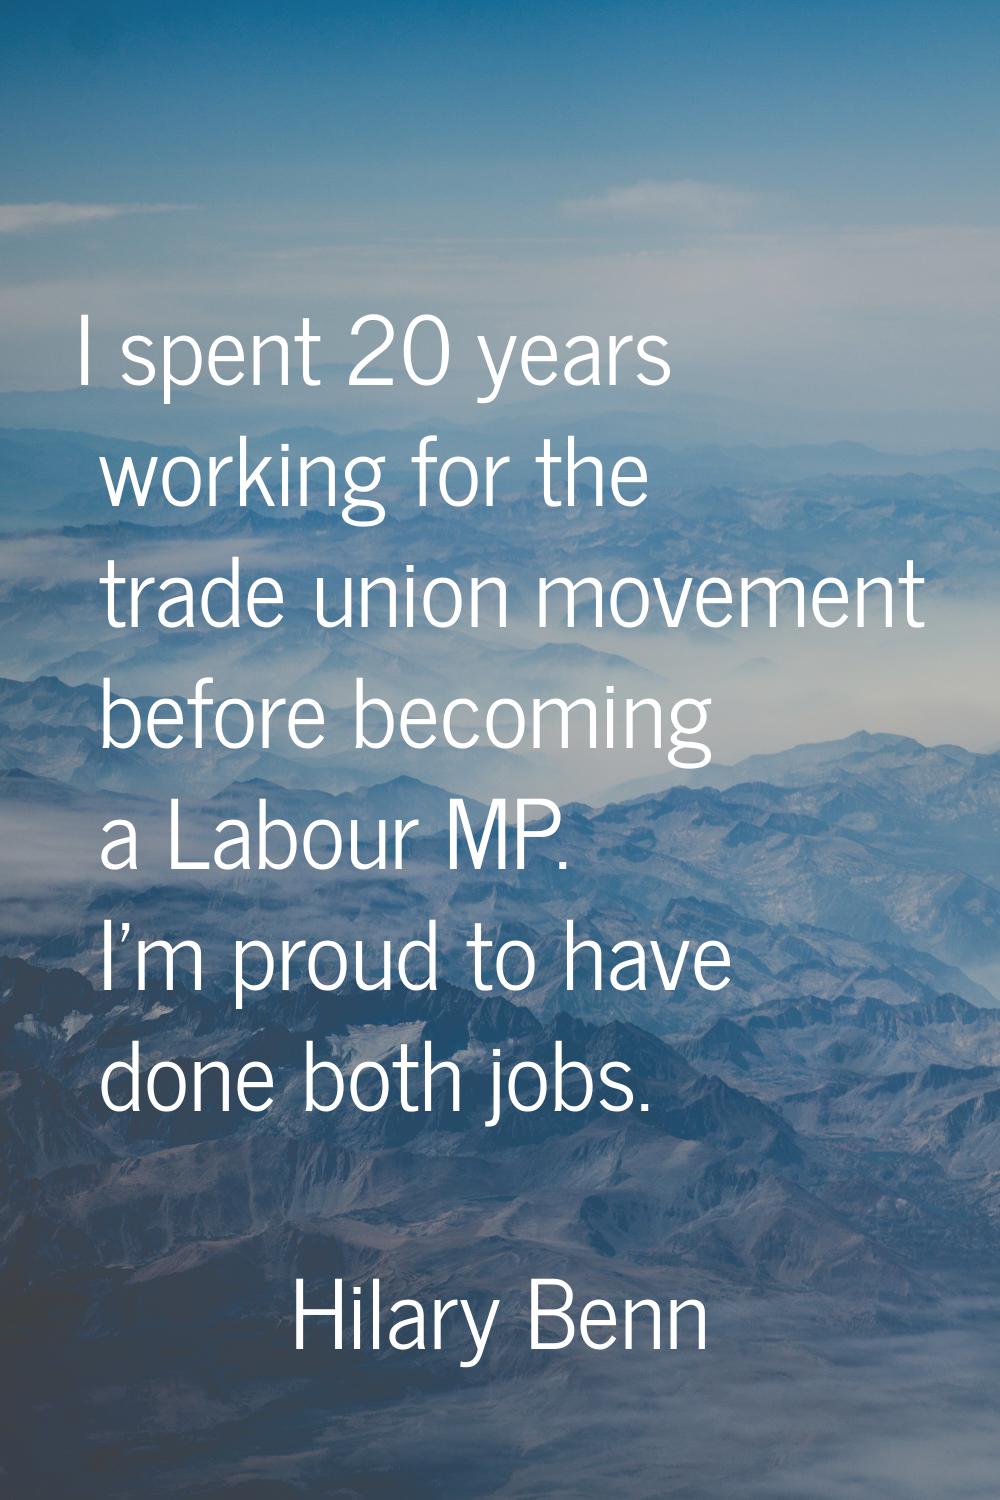 I spent 20 years working for the trade union movement before becoming a Labour MP. I'm proud to hav